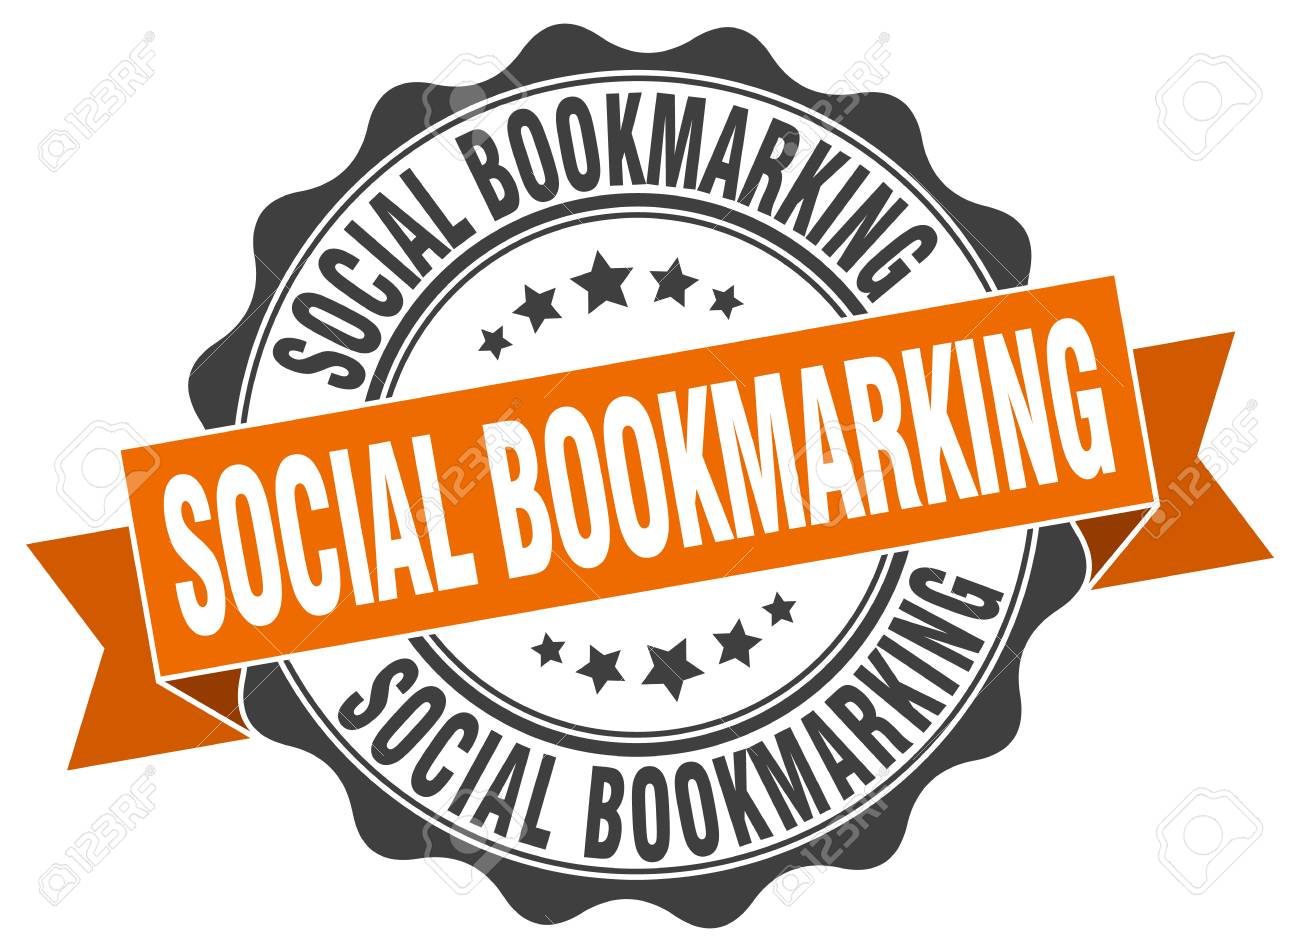 Social Bookmarking Clipart si